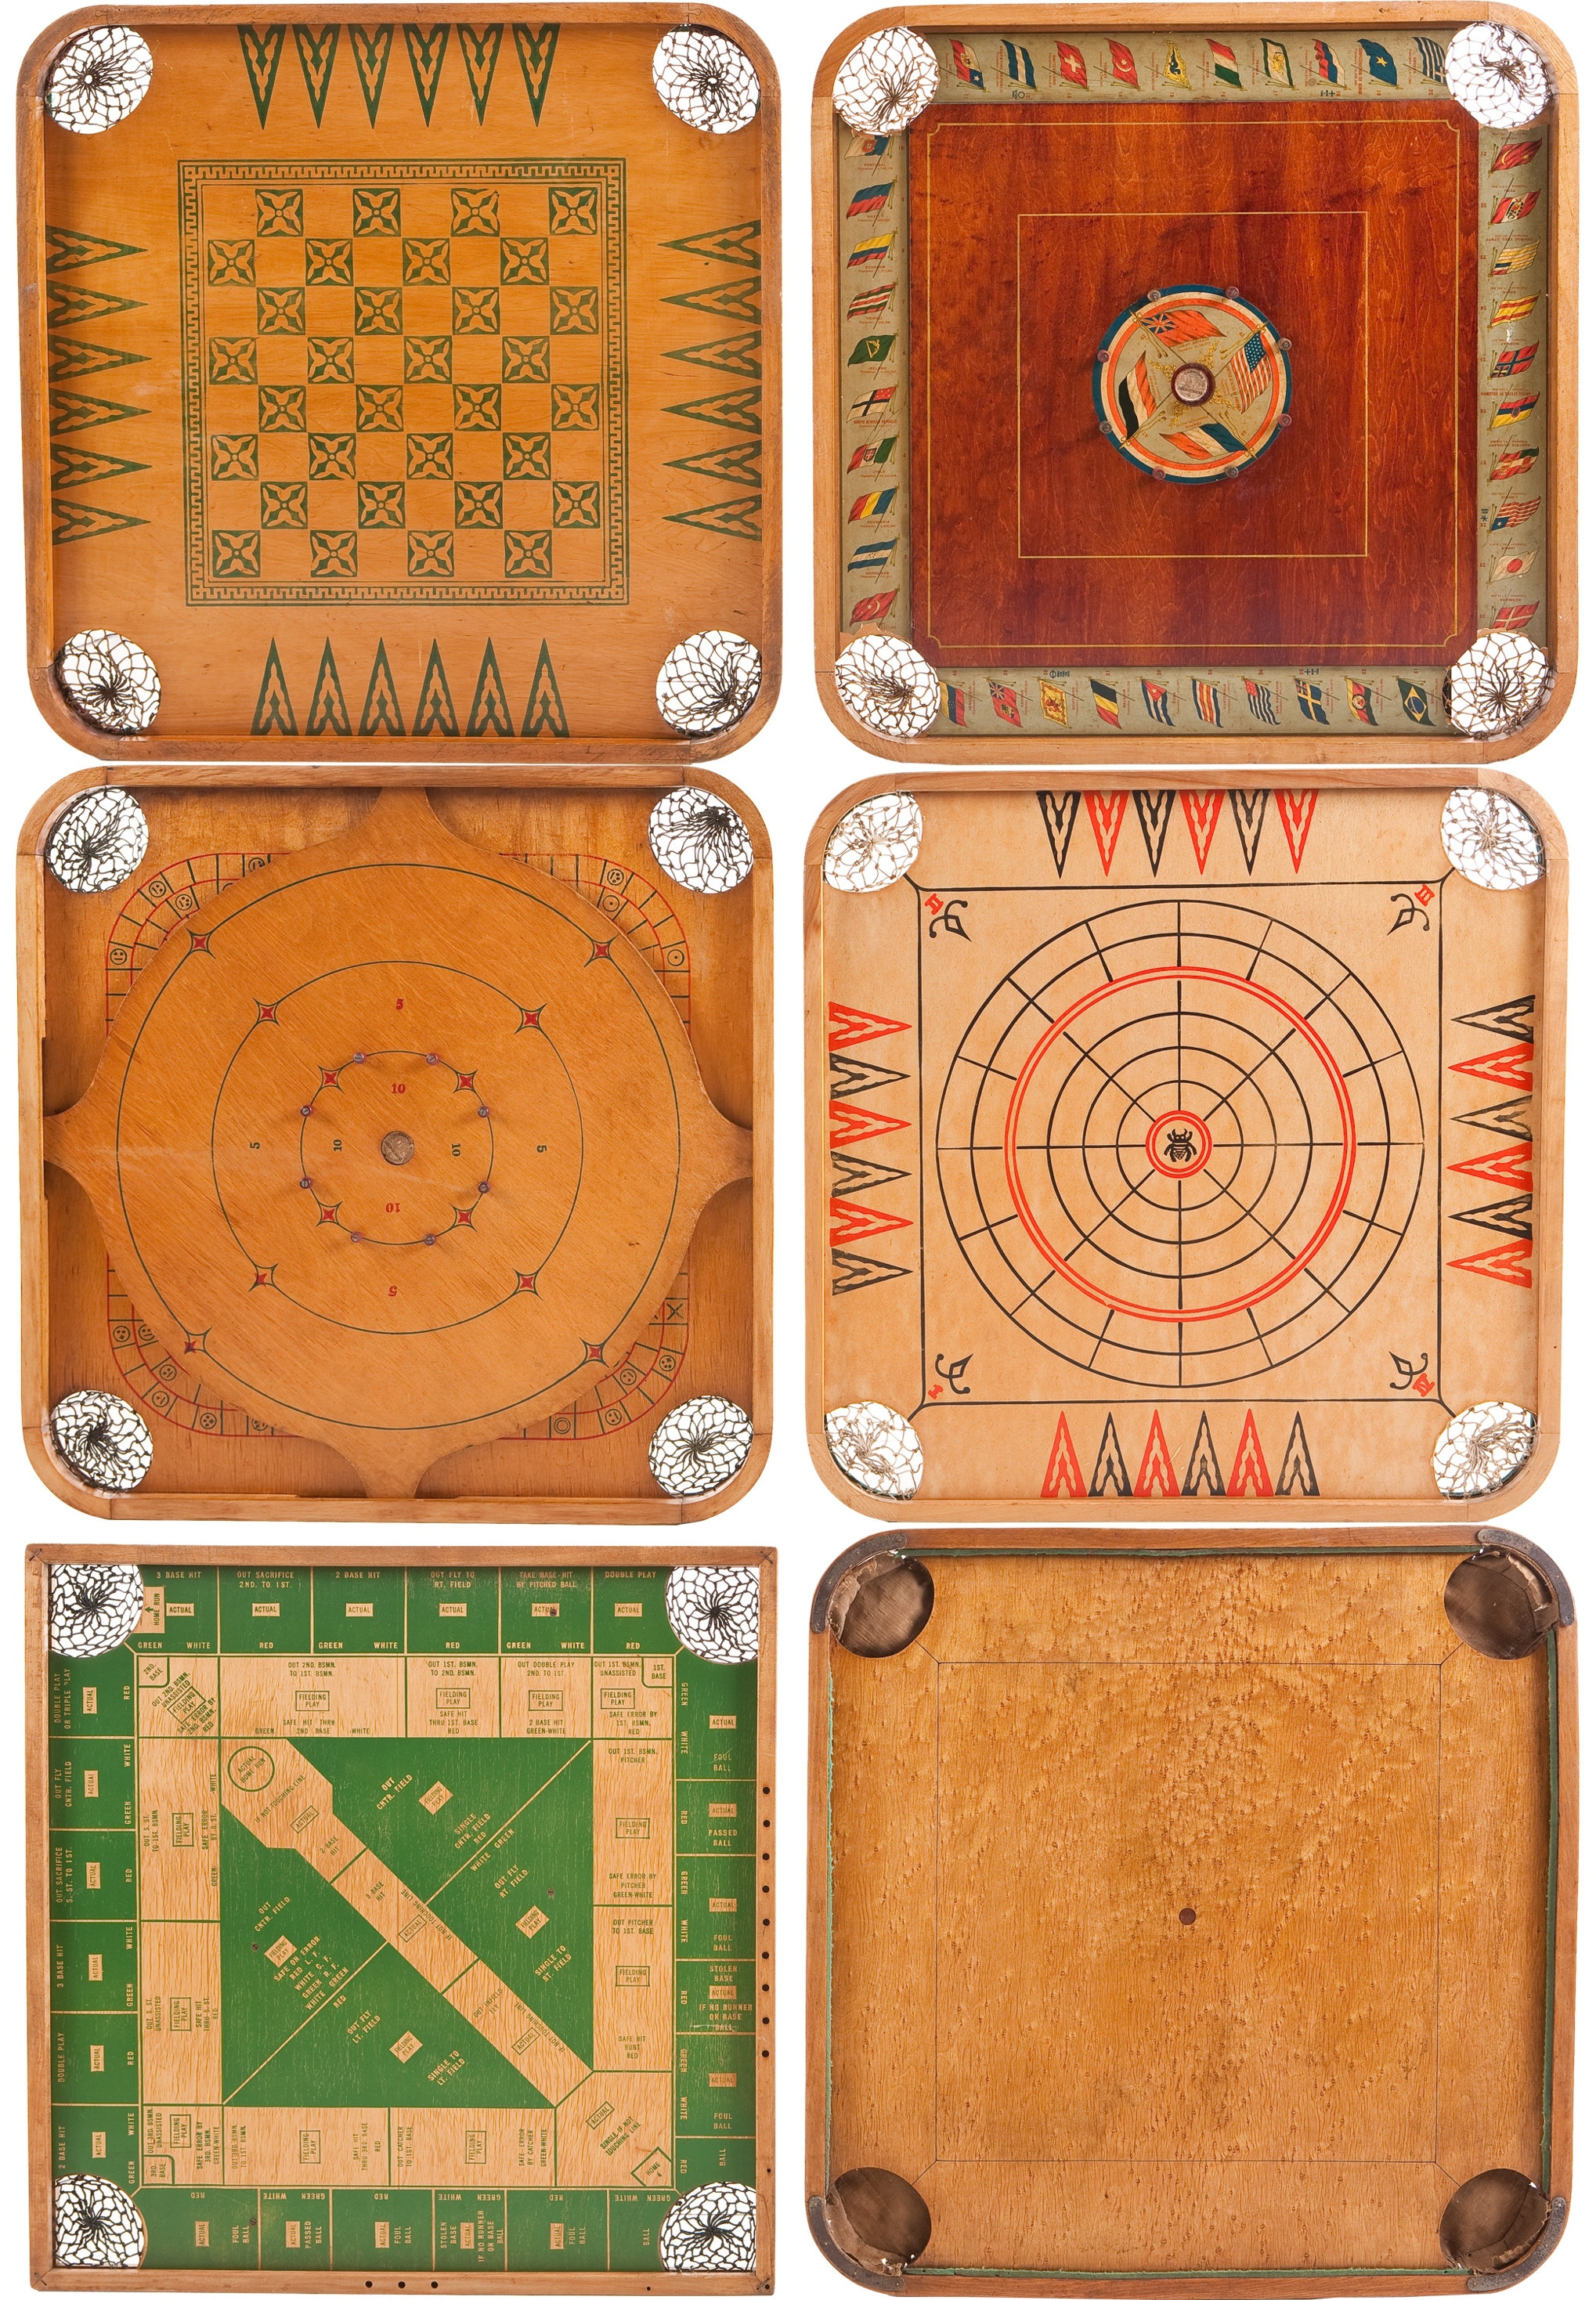 Different types of American Carrom boards